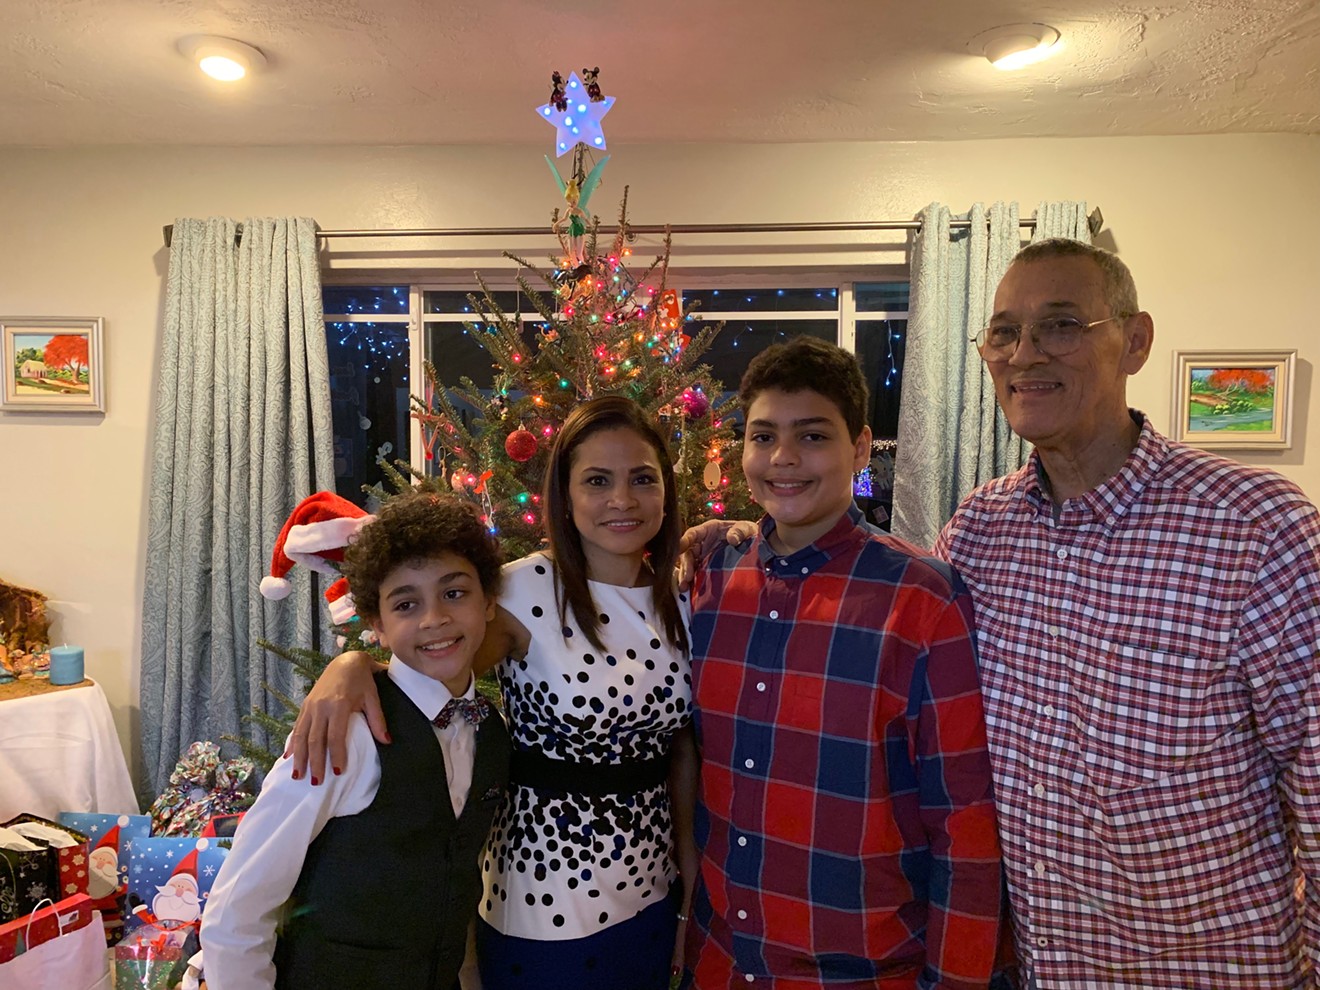 The Inoa family at Christmas: (from left) Adrian, Rosa, Angel, and Roberto